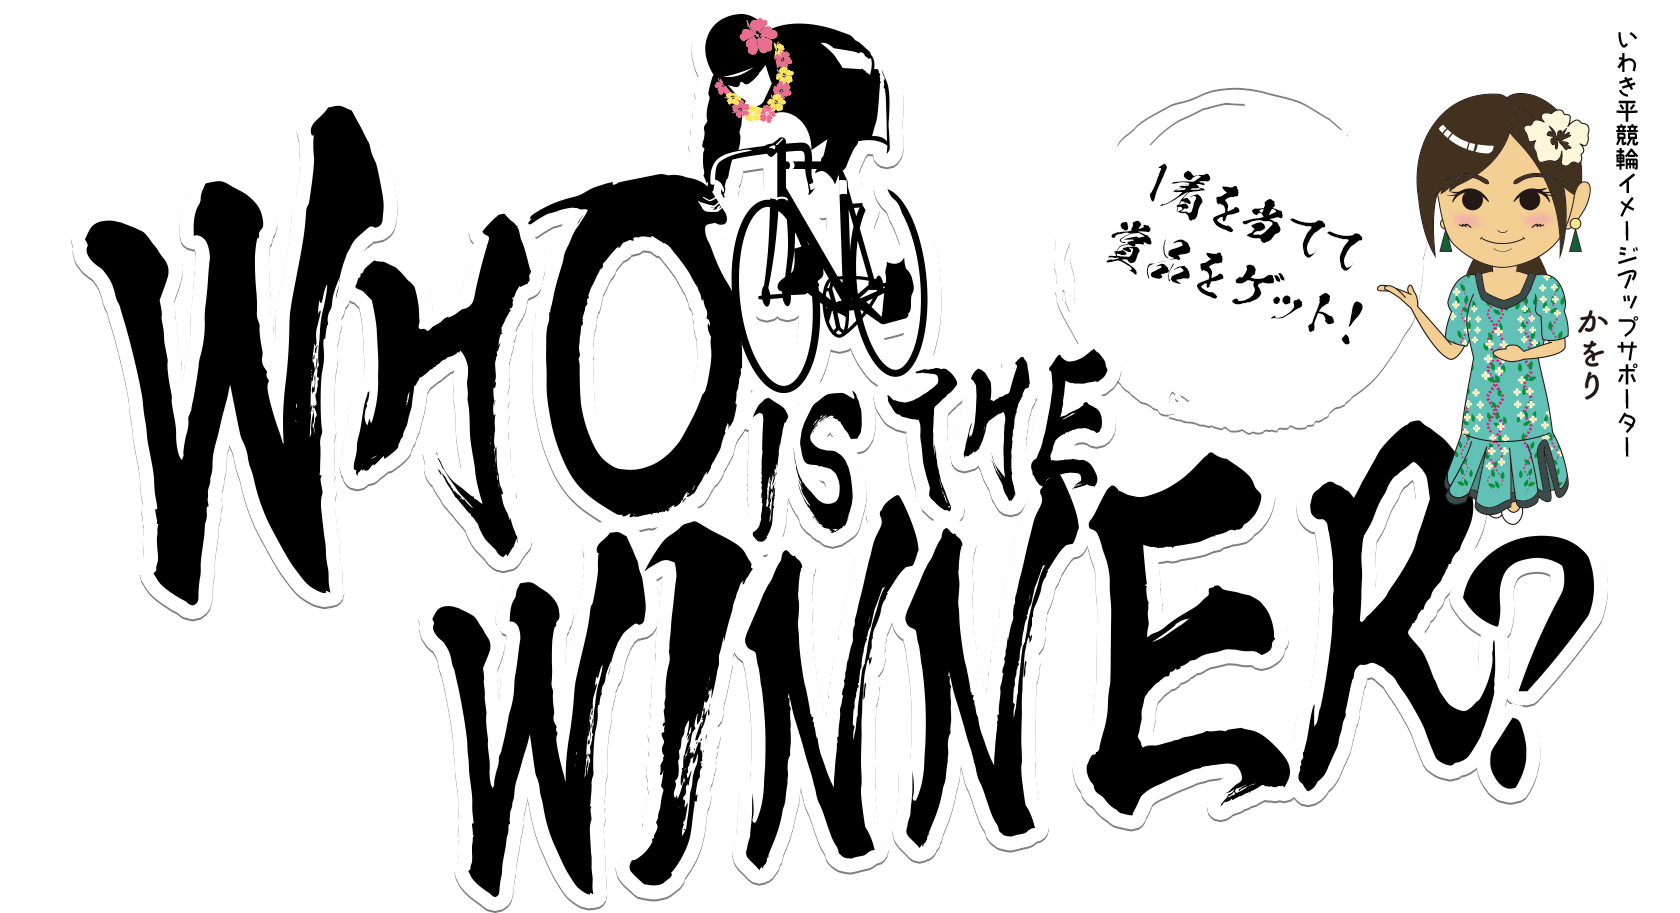 Who is the winner? 1着を当てて賞品をゲット！